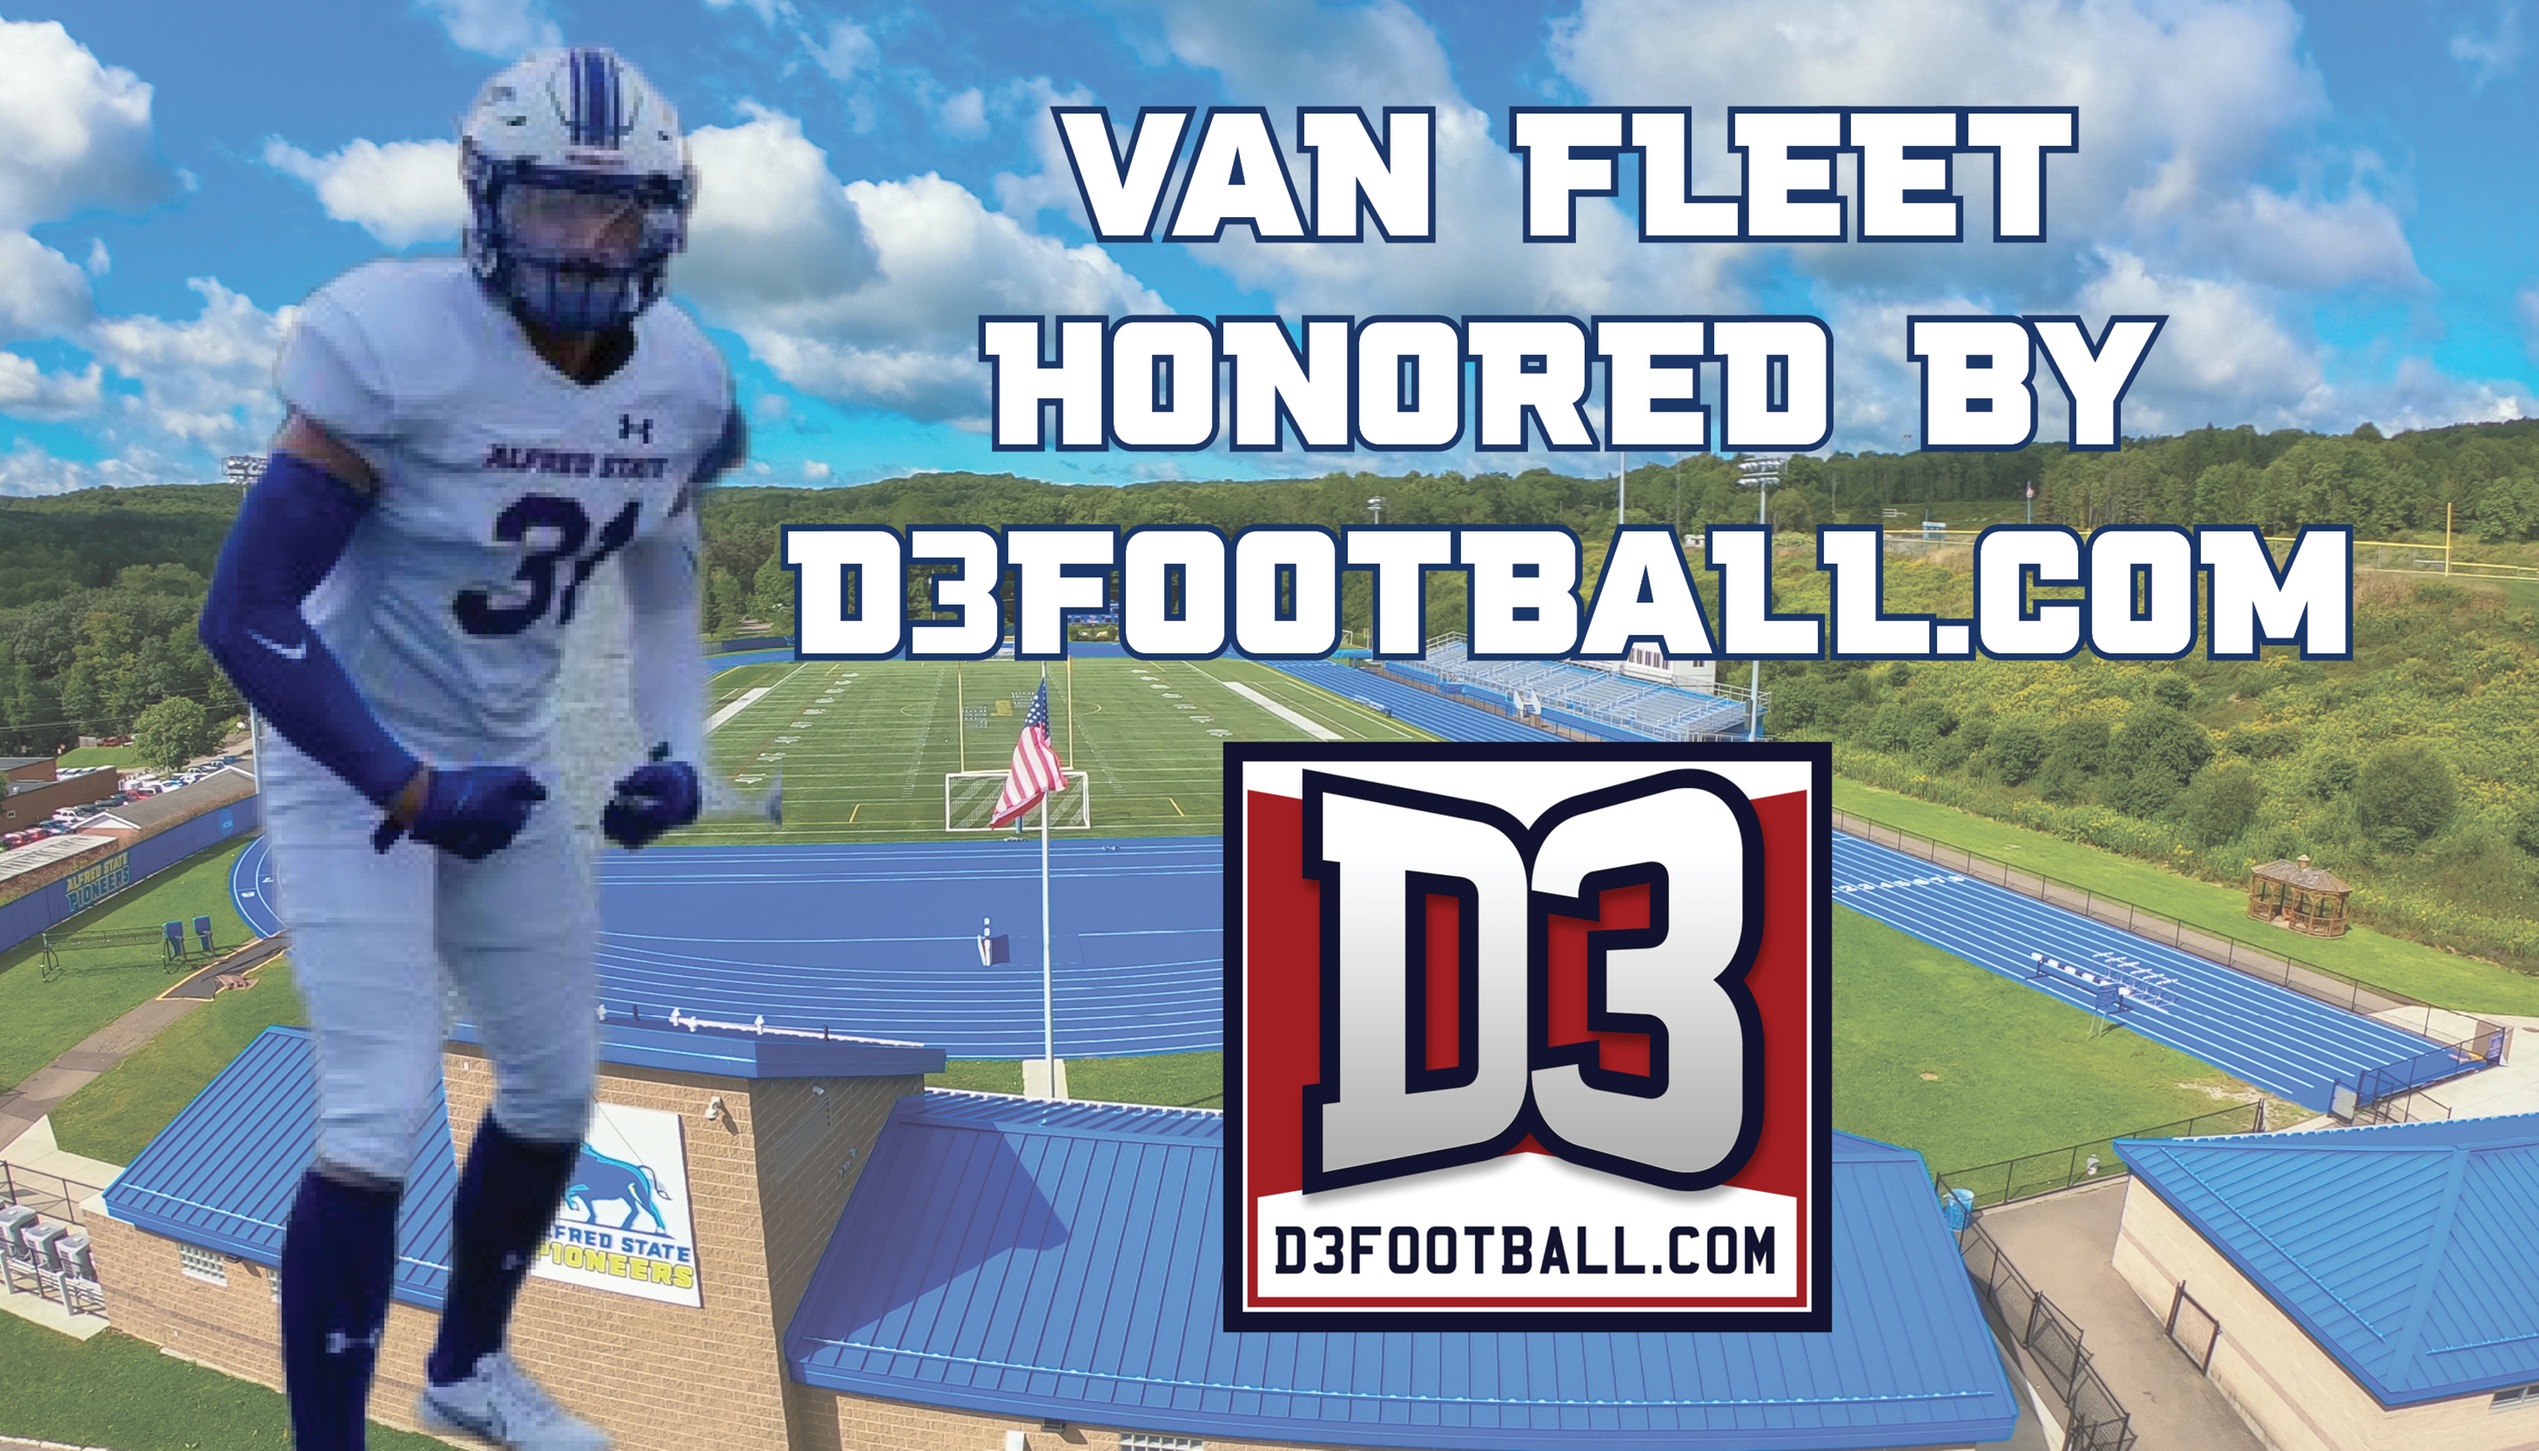 Rylie Van Fleet honored by D3football.com. He is pictured here with an image of Pioneer Stadium in the background.